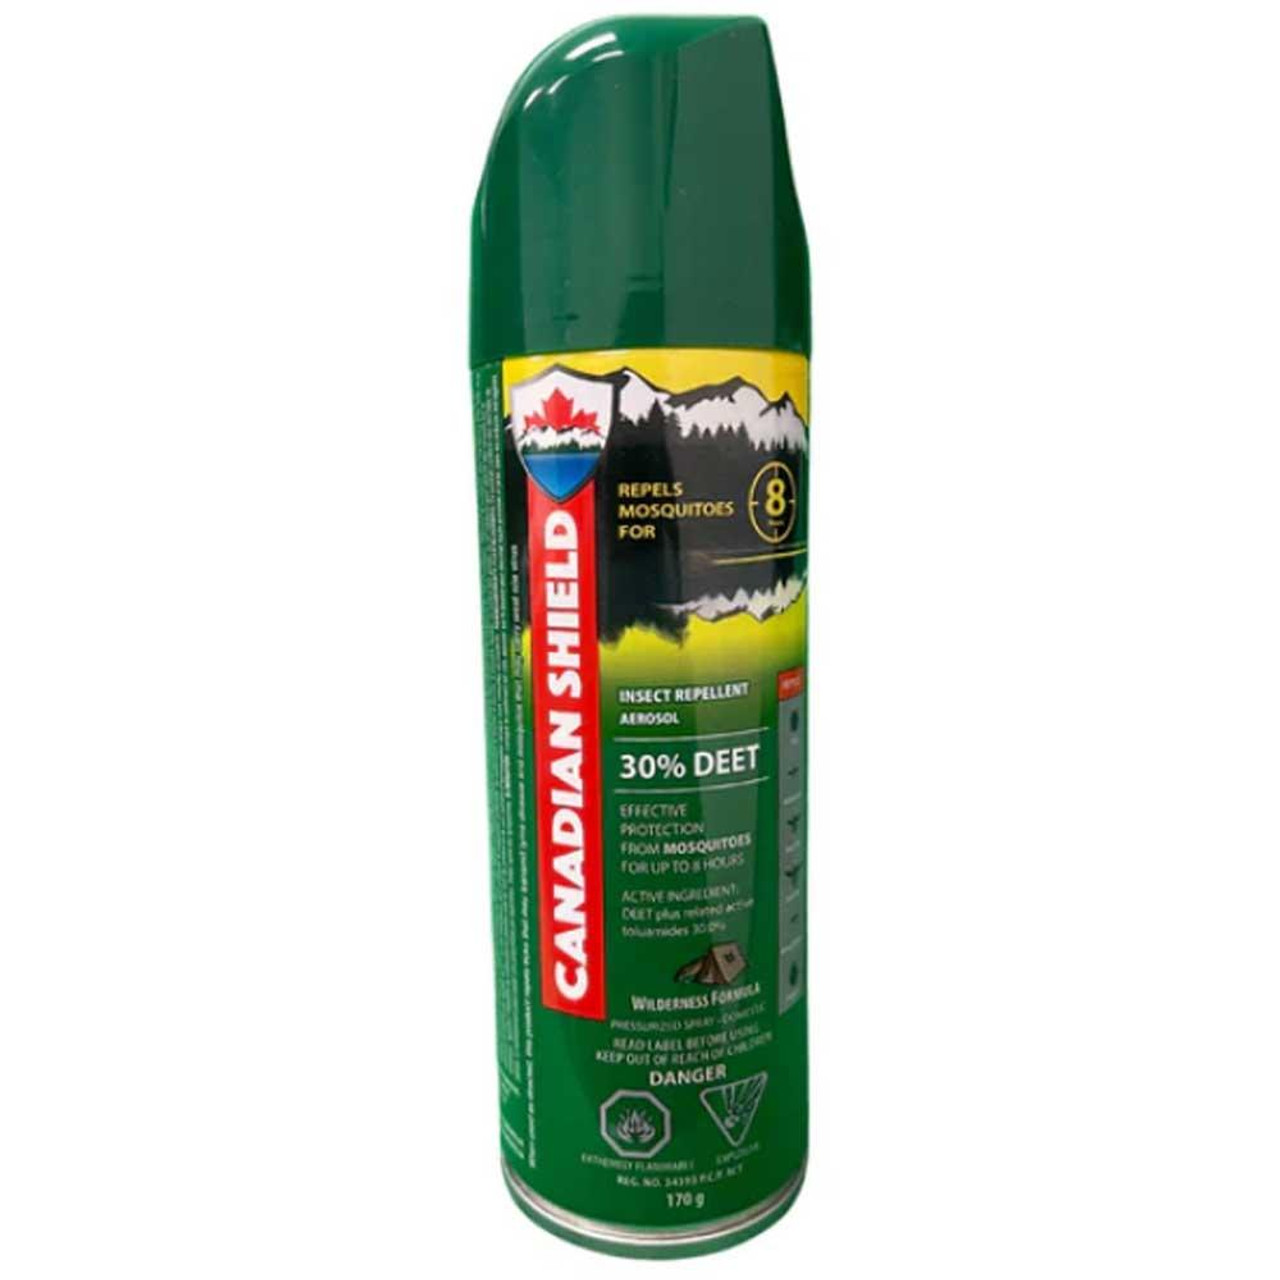 Canadian Shield Canadian Shield Insect Repellent-170G 30% DEET Aerosol